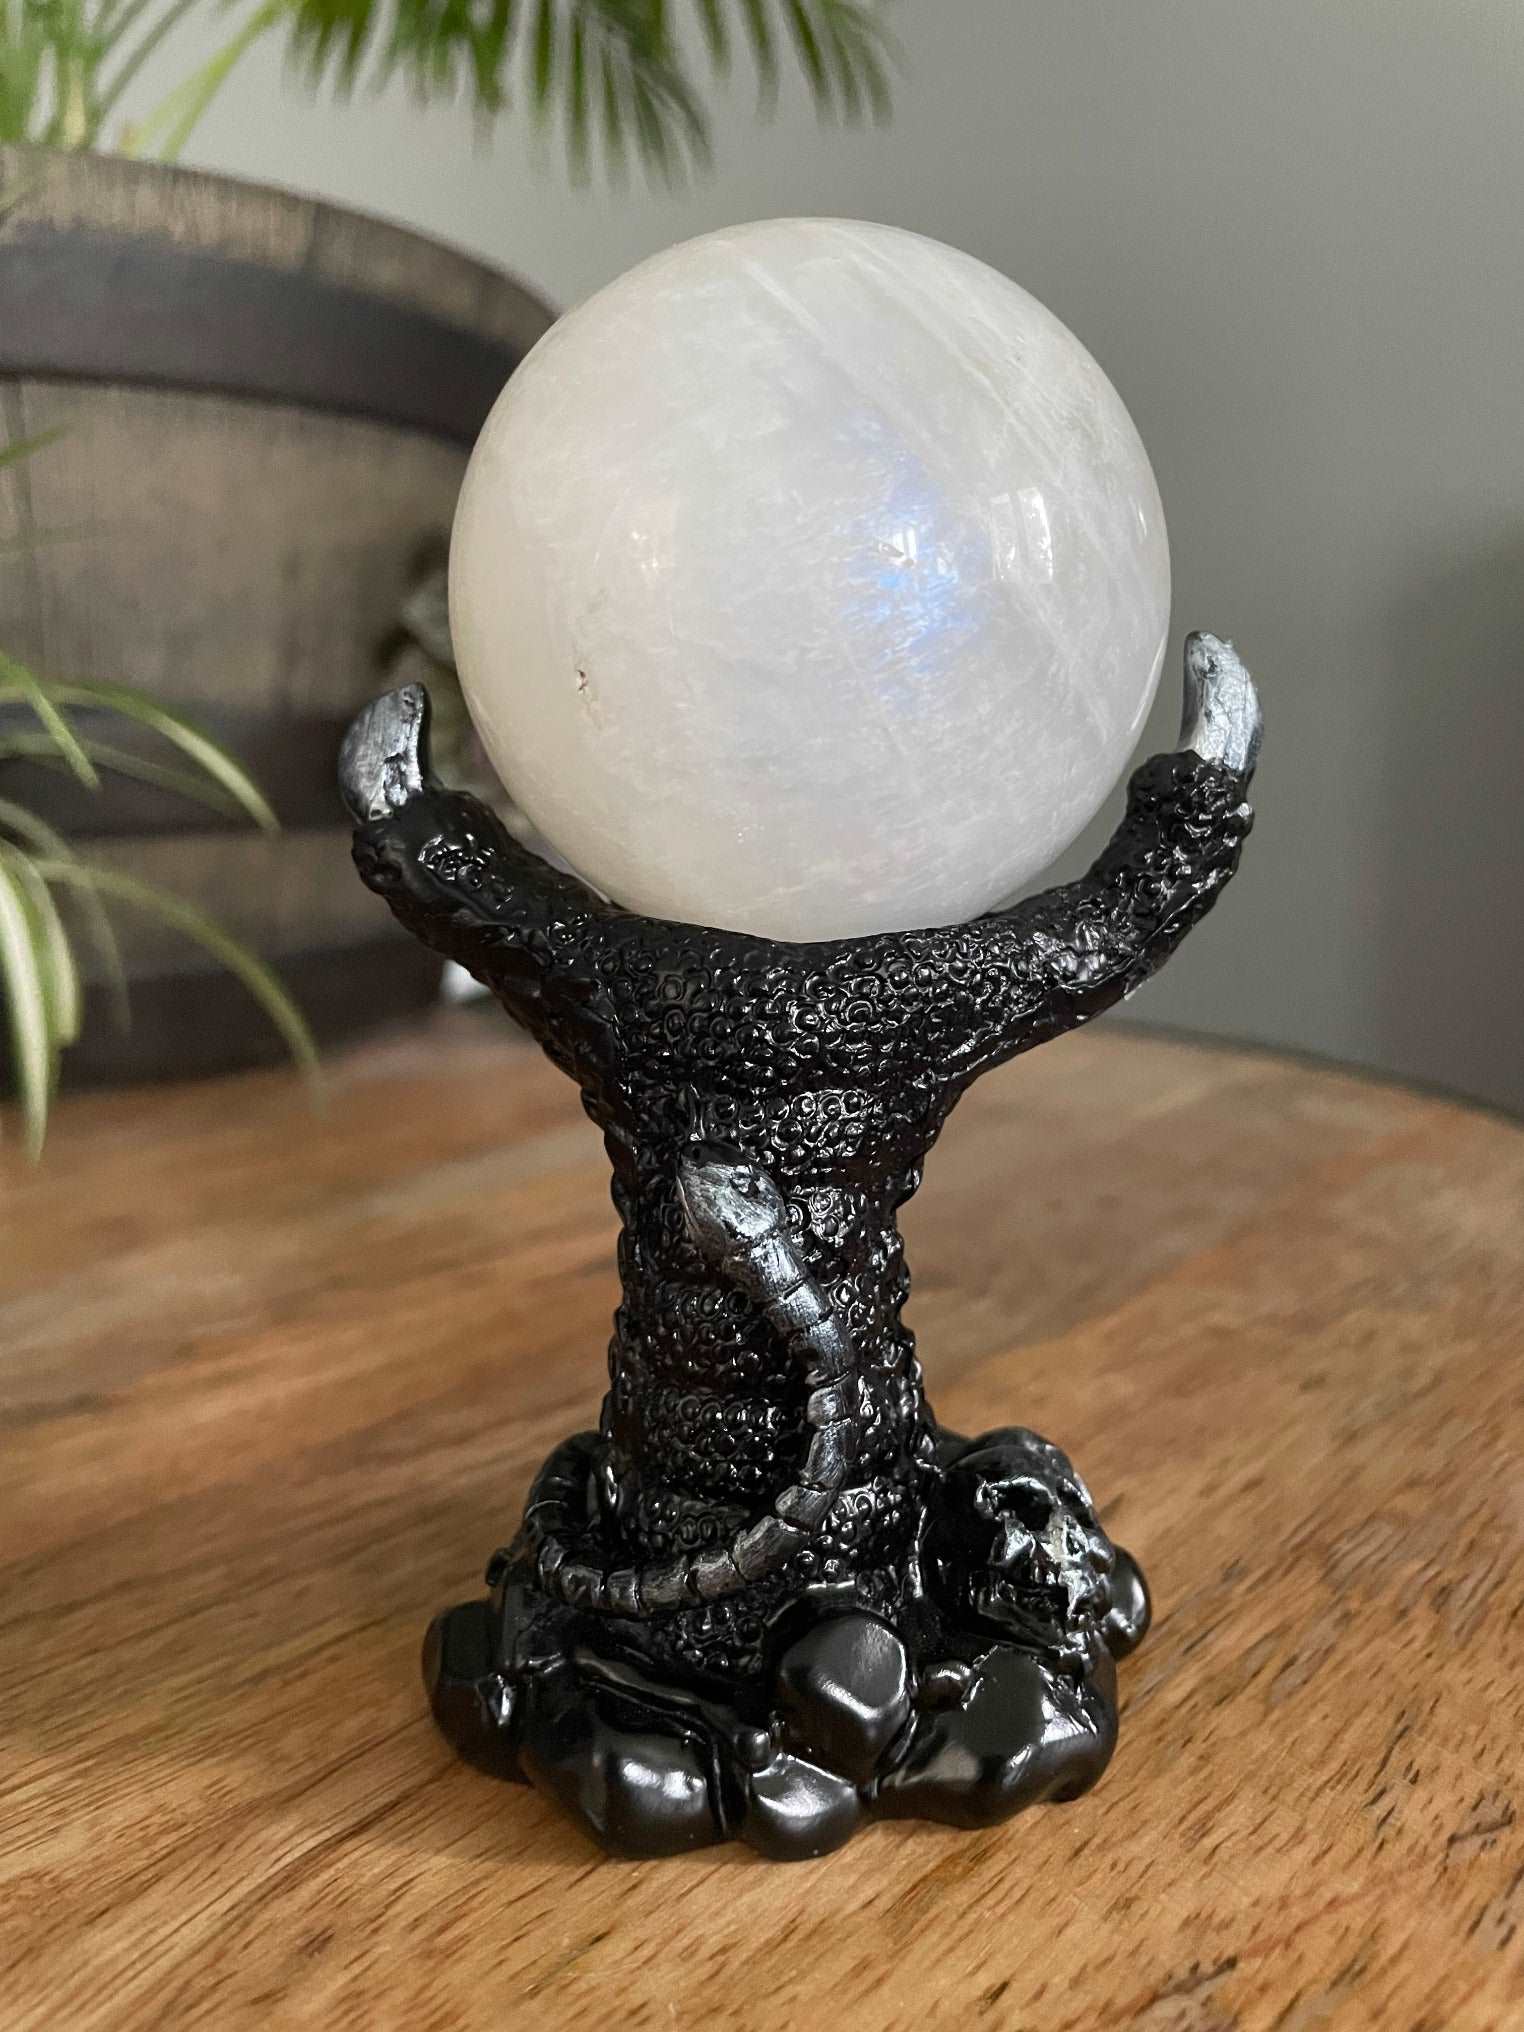 Pictured is a sphere stand in the shape of a black dragon's claw.